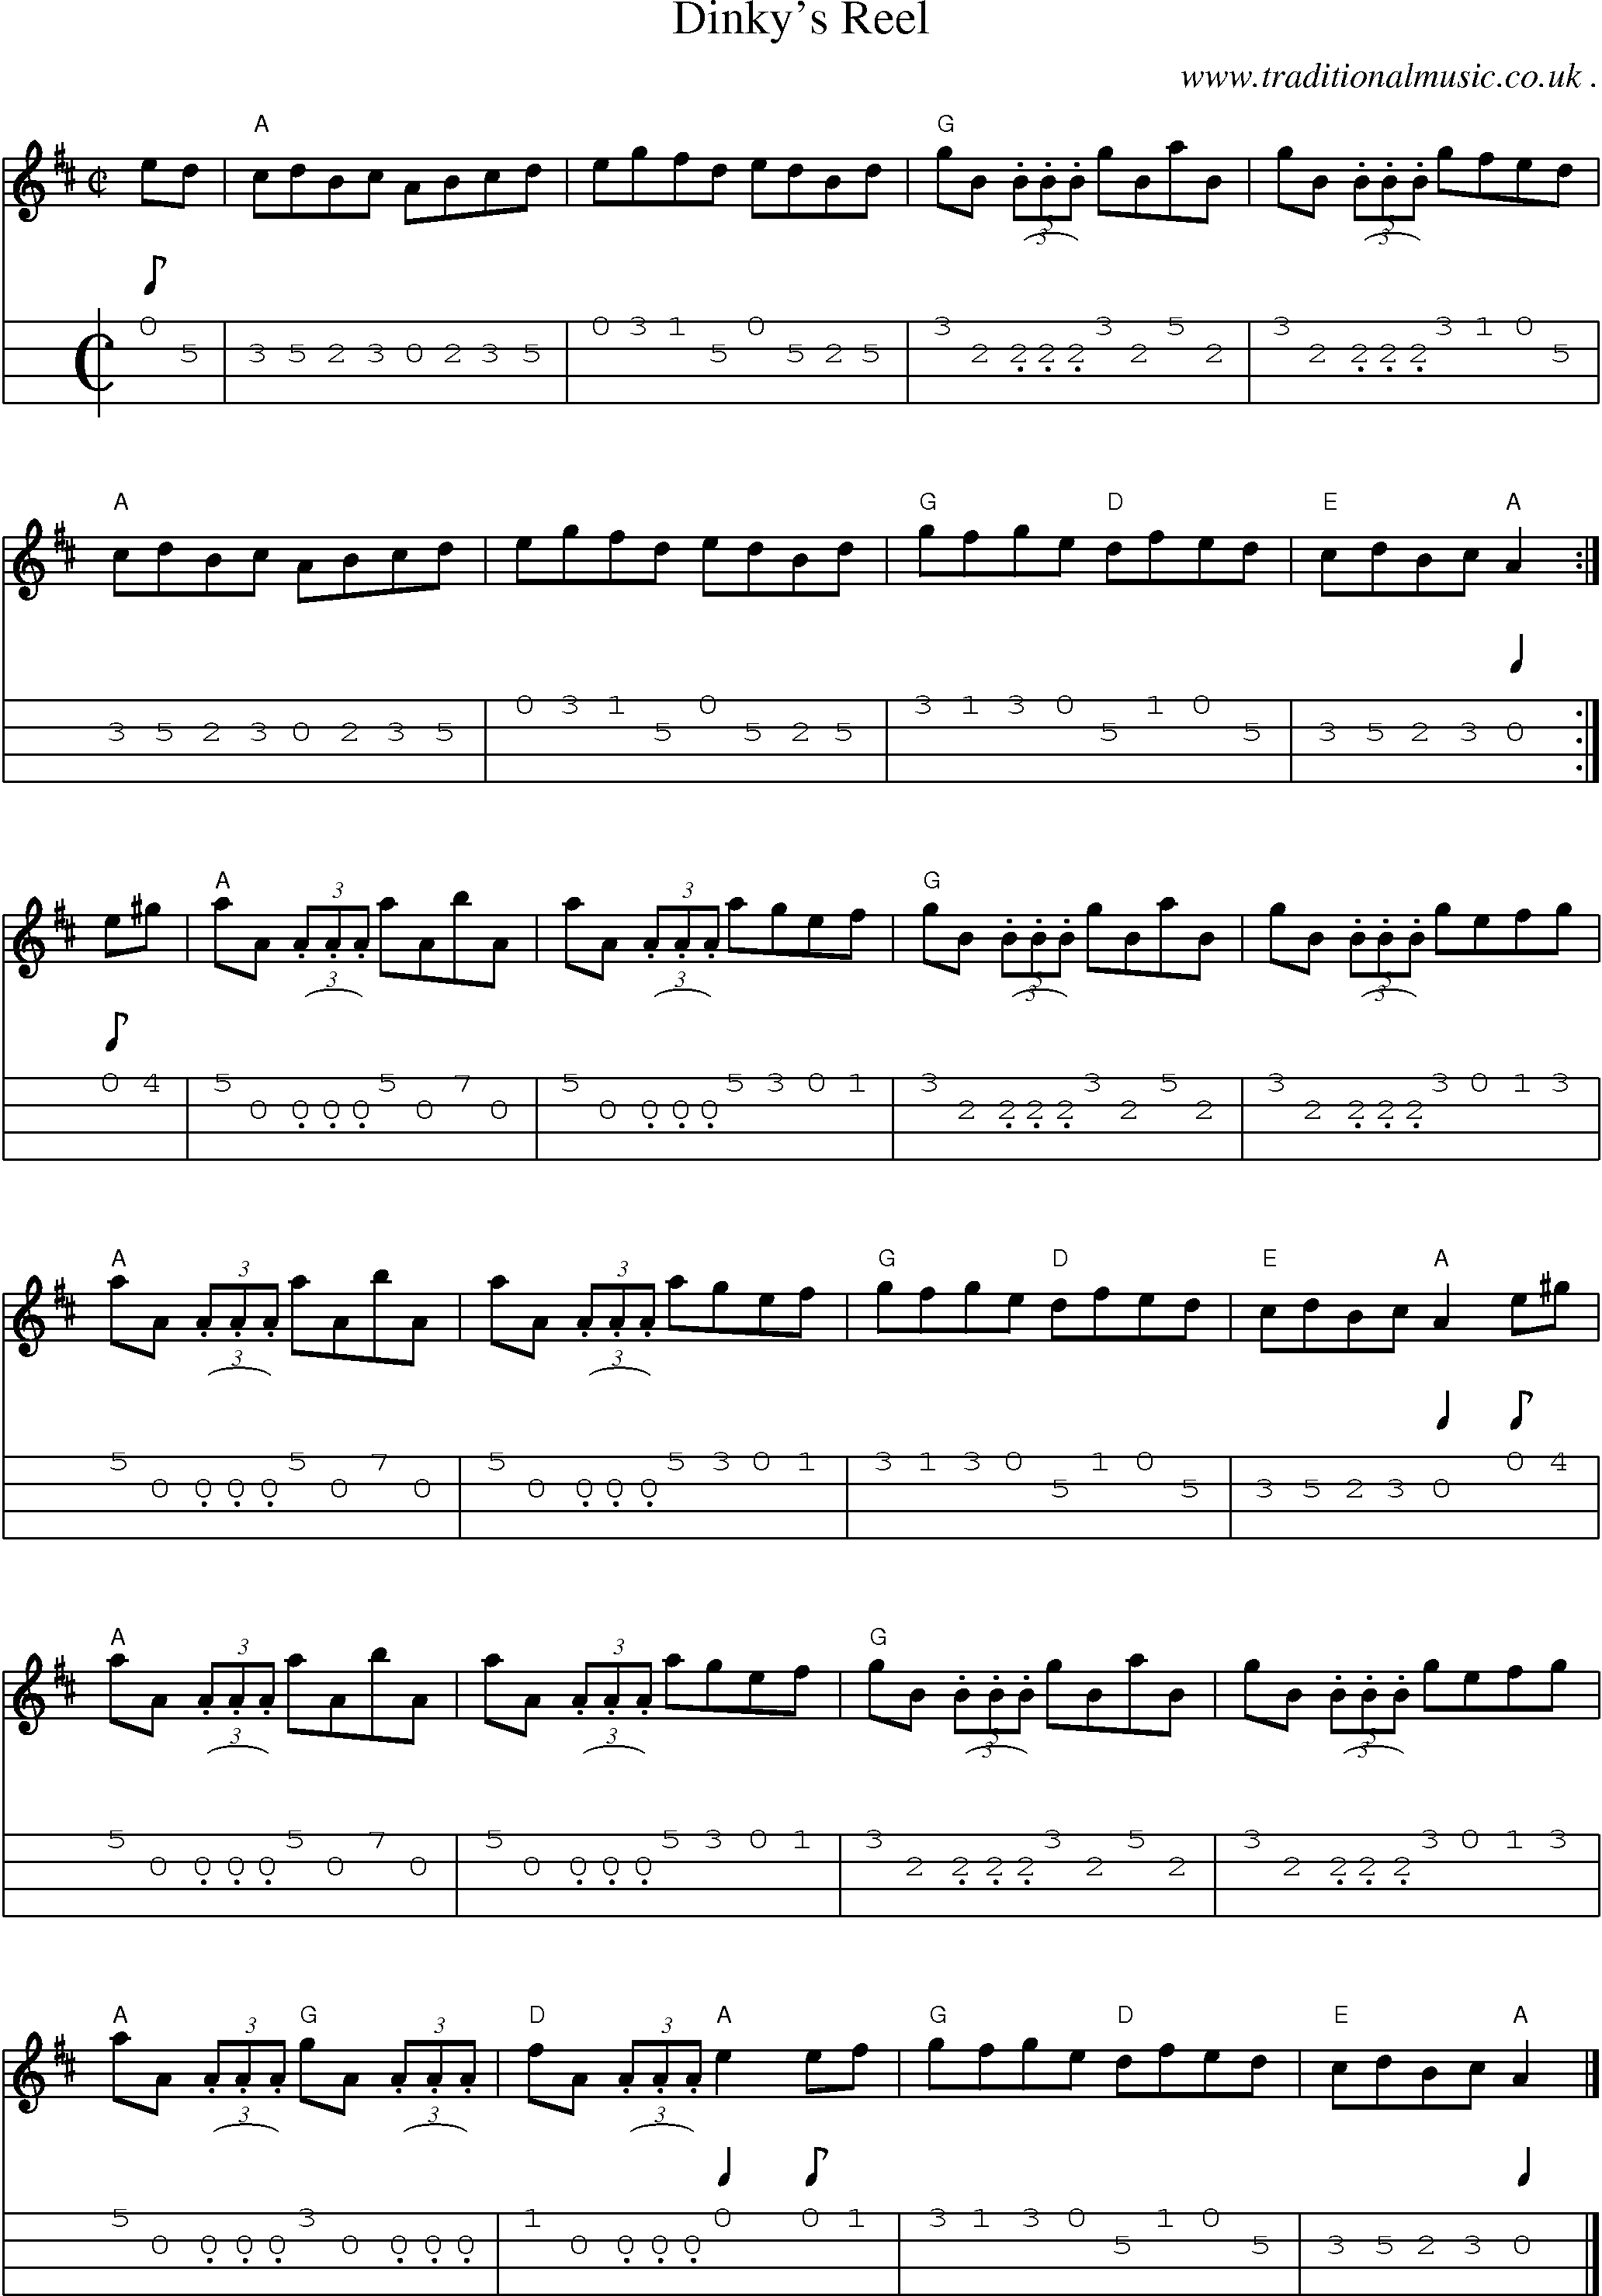 Sheet-music  score, Chords and Mandolin Tabs for Dinkys Reel